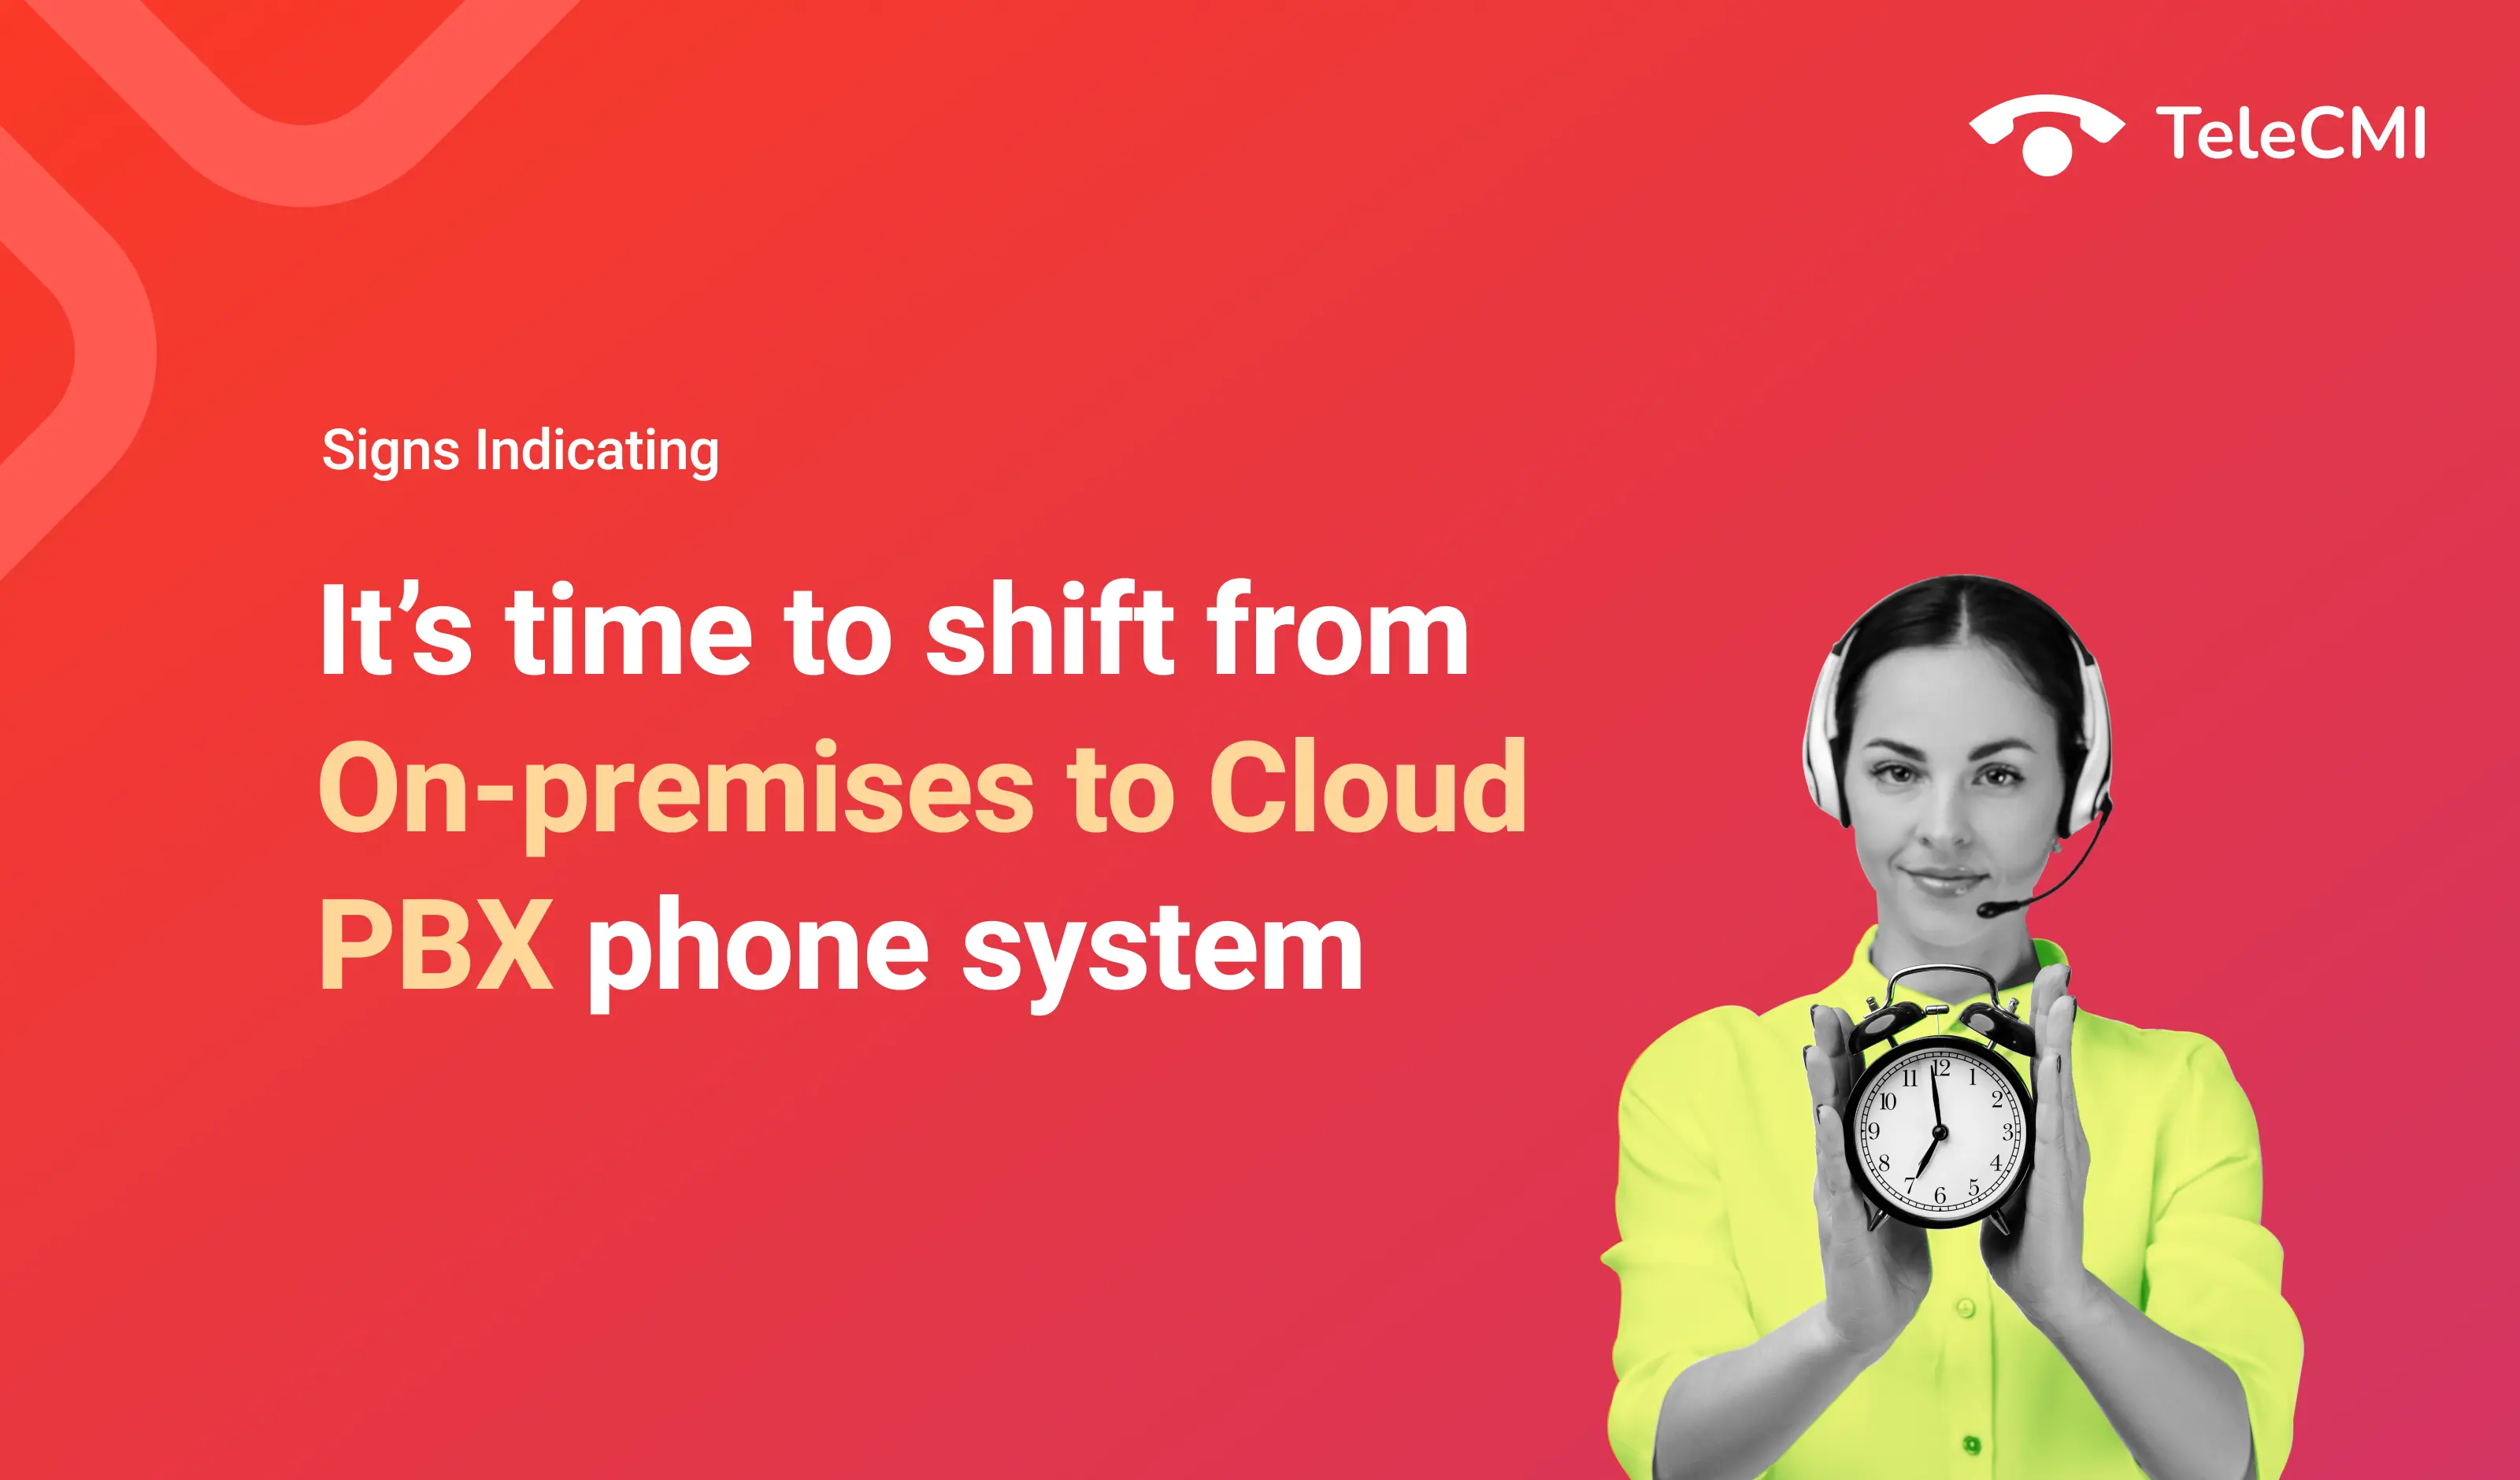 Signs Indicating It's Time to Shift from On-Premises to PBX Phone Systems